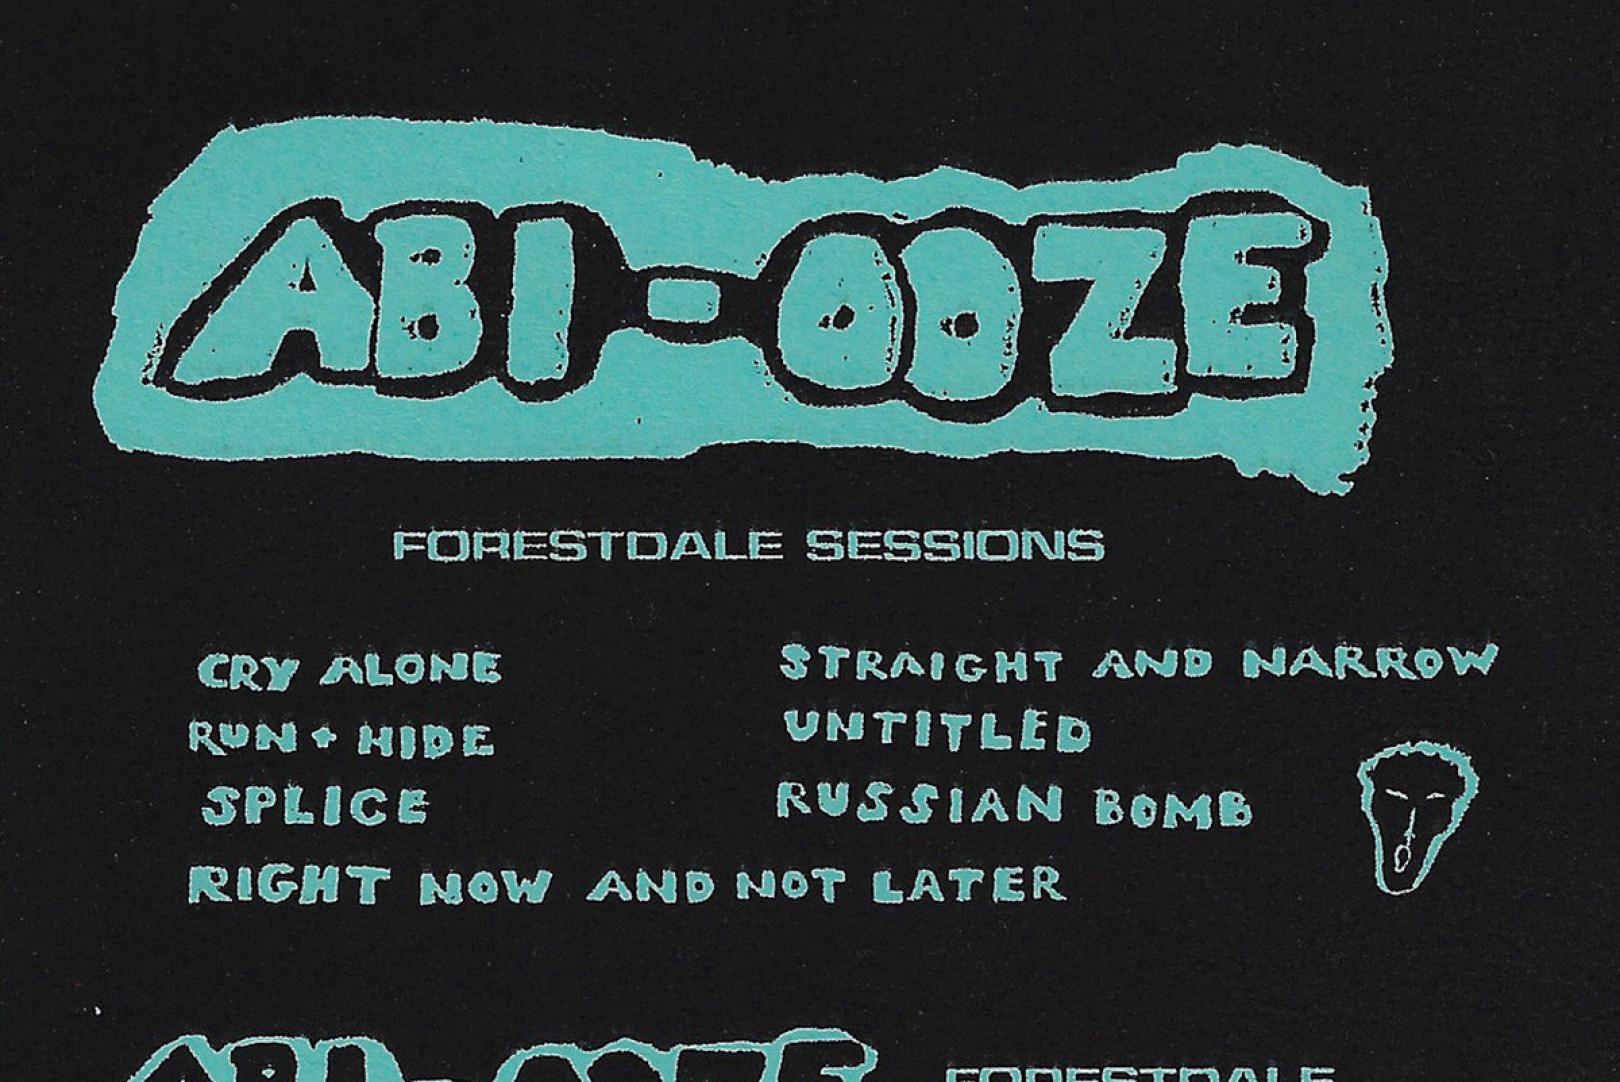 Abi Ooze to release new EP